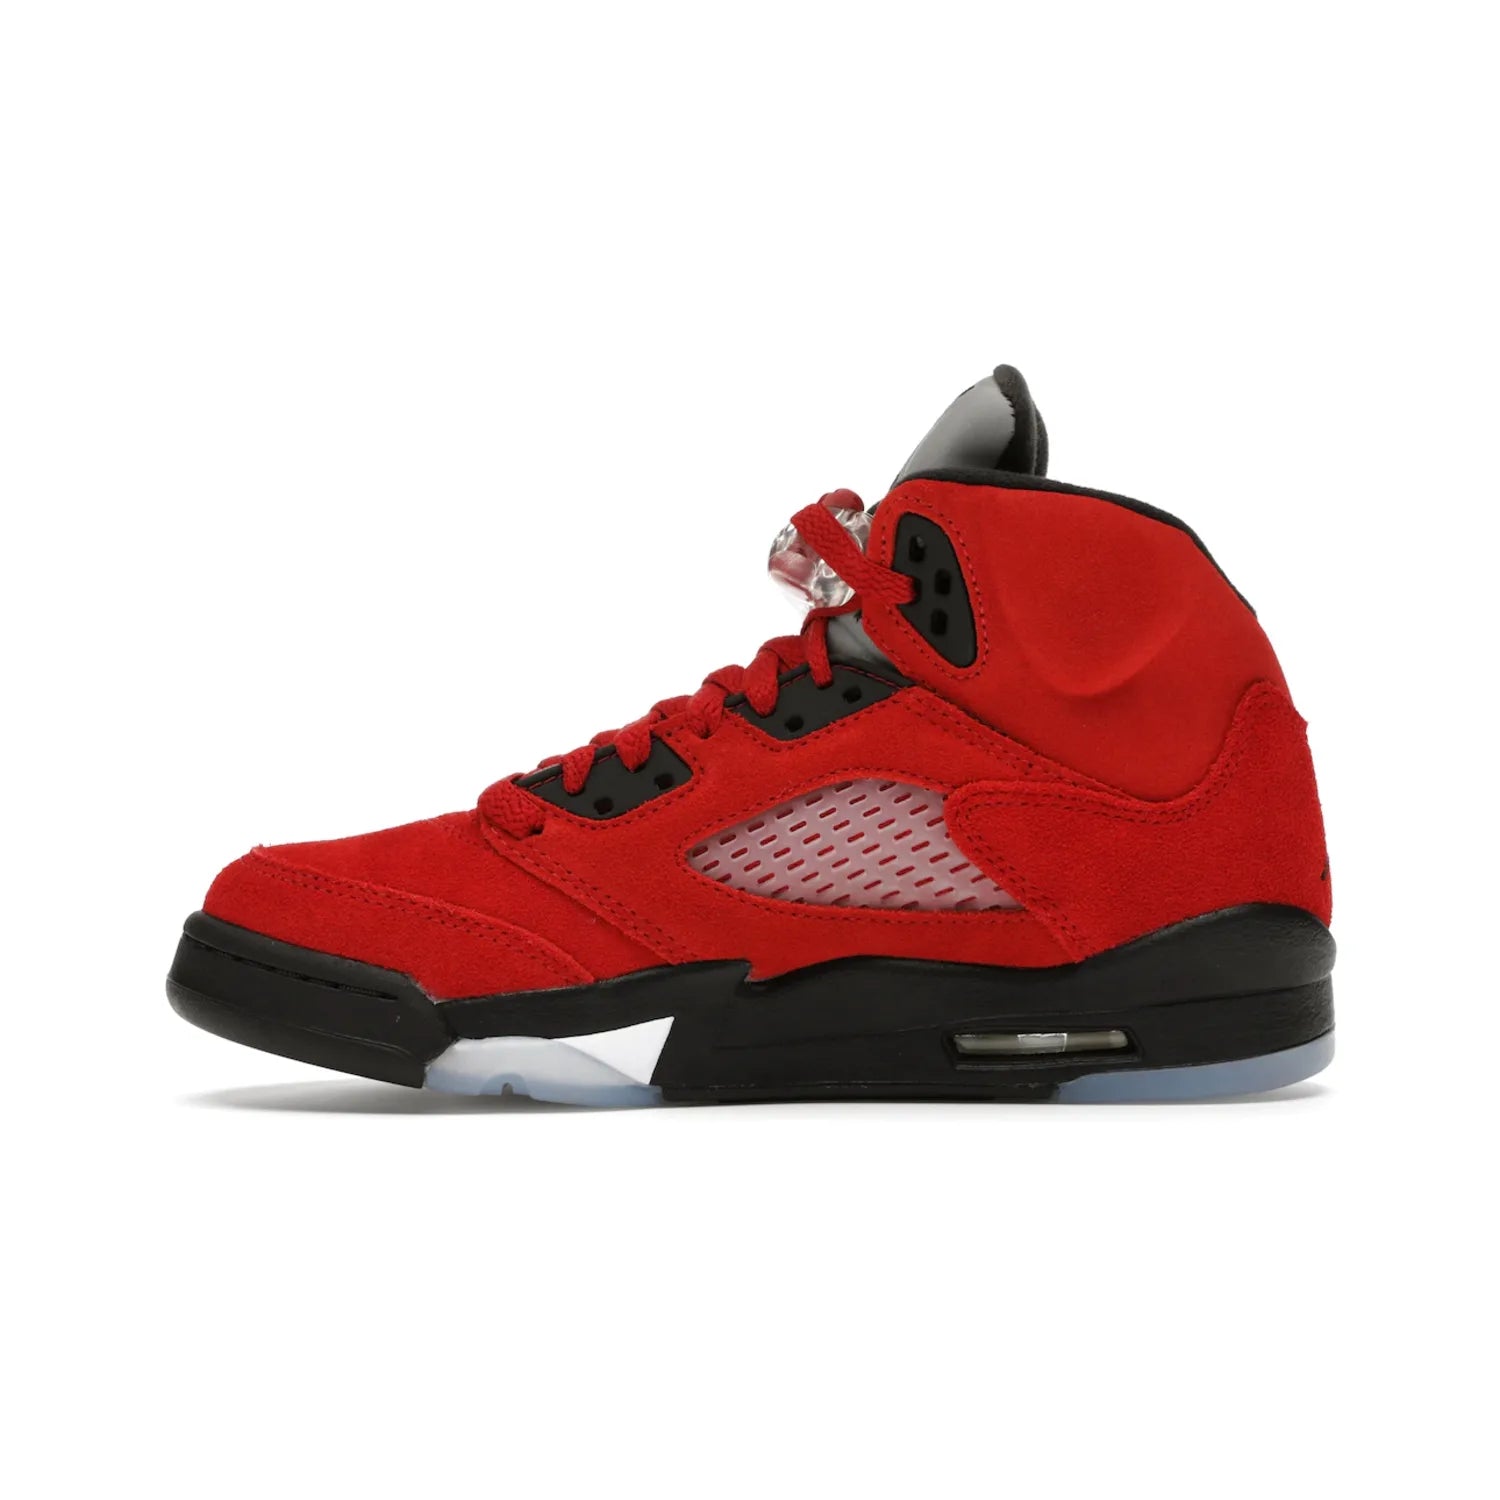 Jordan 5 Retro Raging Bull Red (2021) (GS) - Image 19 - Only at www.BallersClubKickz.com - Jordan 5 Retro Raging Bulls Red 2021 GS. Varsity Red suede upper with embroidered number 23, black leather detail, red laces, and midsole with air cushioning. Jumpman logos on tongue, heel, and outsole. On-trend streetwear and basketball style. Released April 10, 2021.